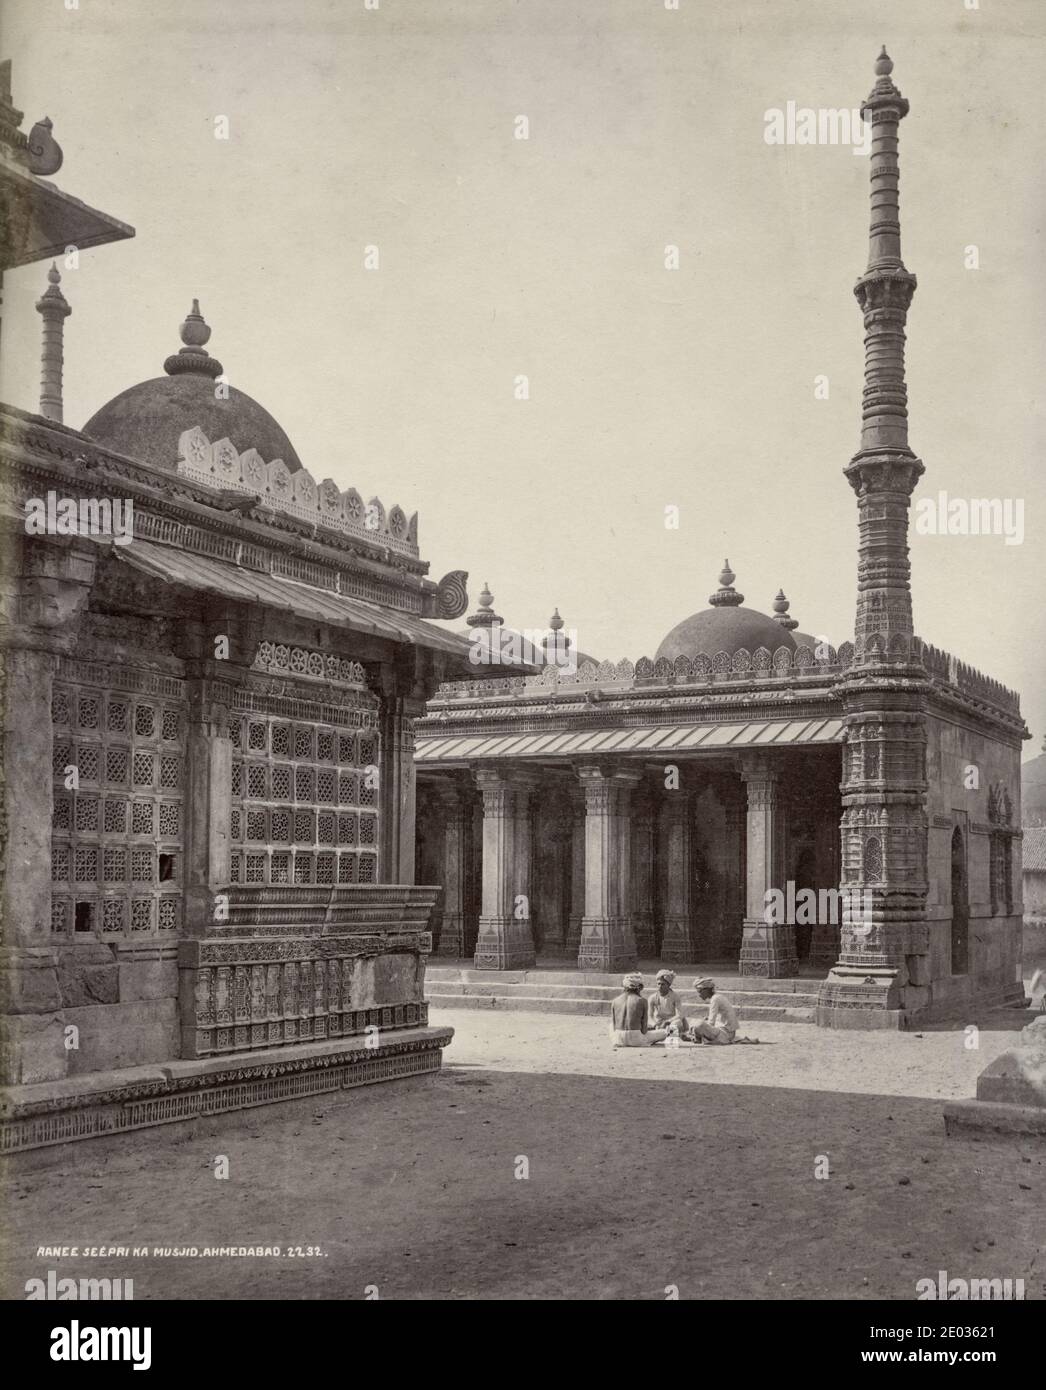 19th century vintage photograph - Rani Sipri's Mosque also known as Rani Sipri ni Masjid or Masjid-e-nagina, formerly known as Rani Asni's Mosque, is a medieval mosque in the walled city of Ahmedabad, Gujarat in India. Image by Samuel Bourne, 1860s. Stock Photo